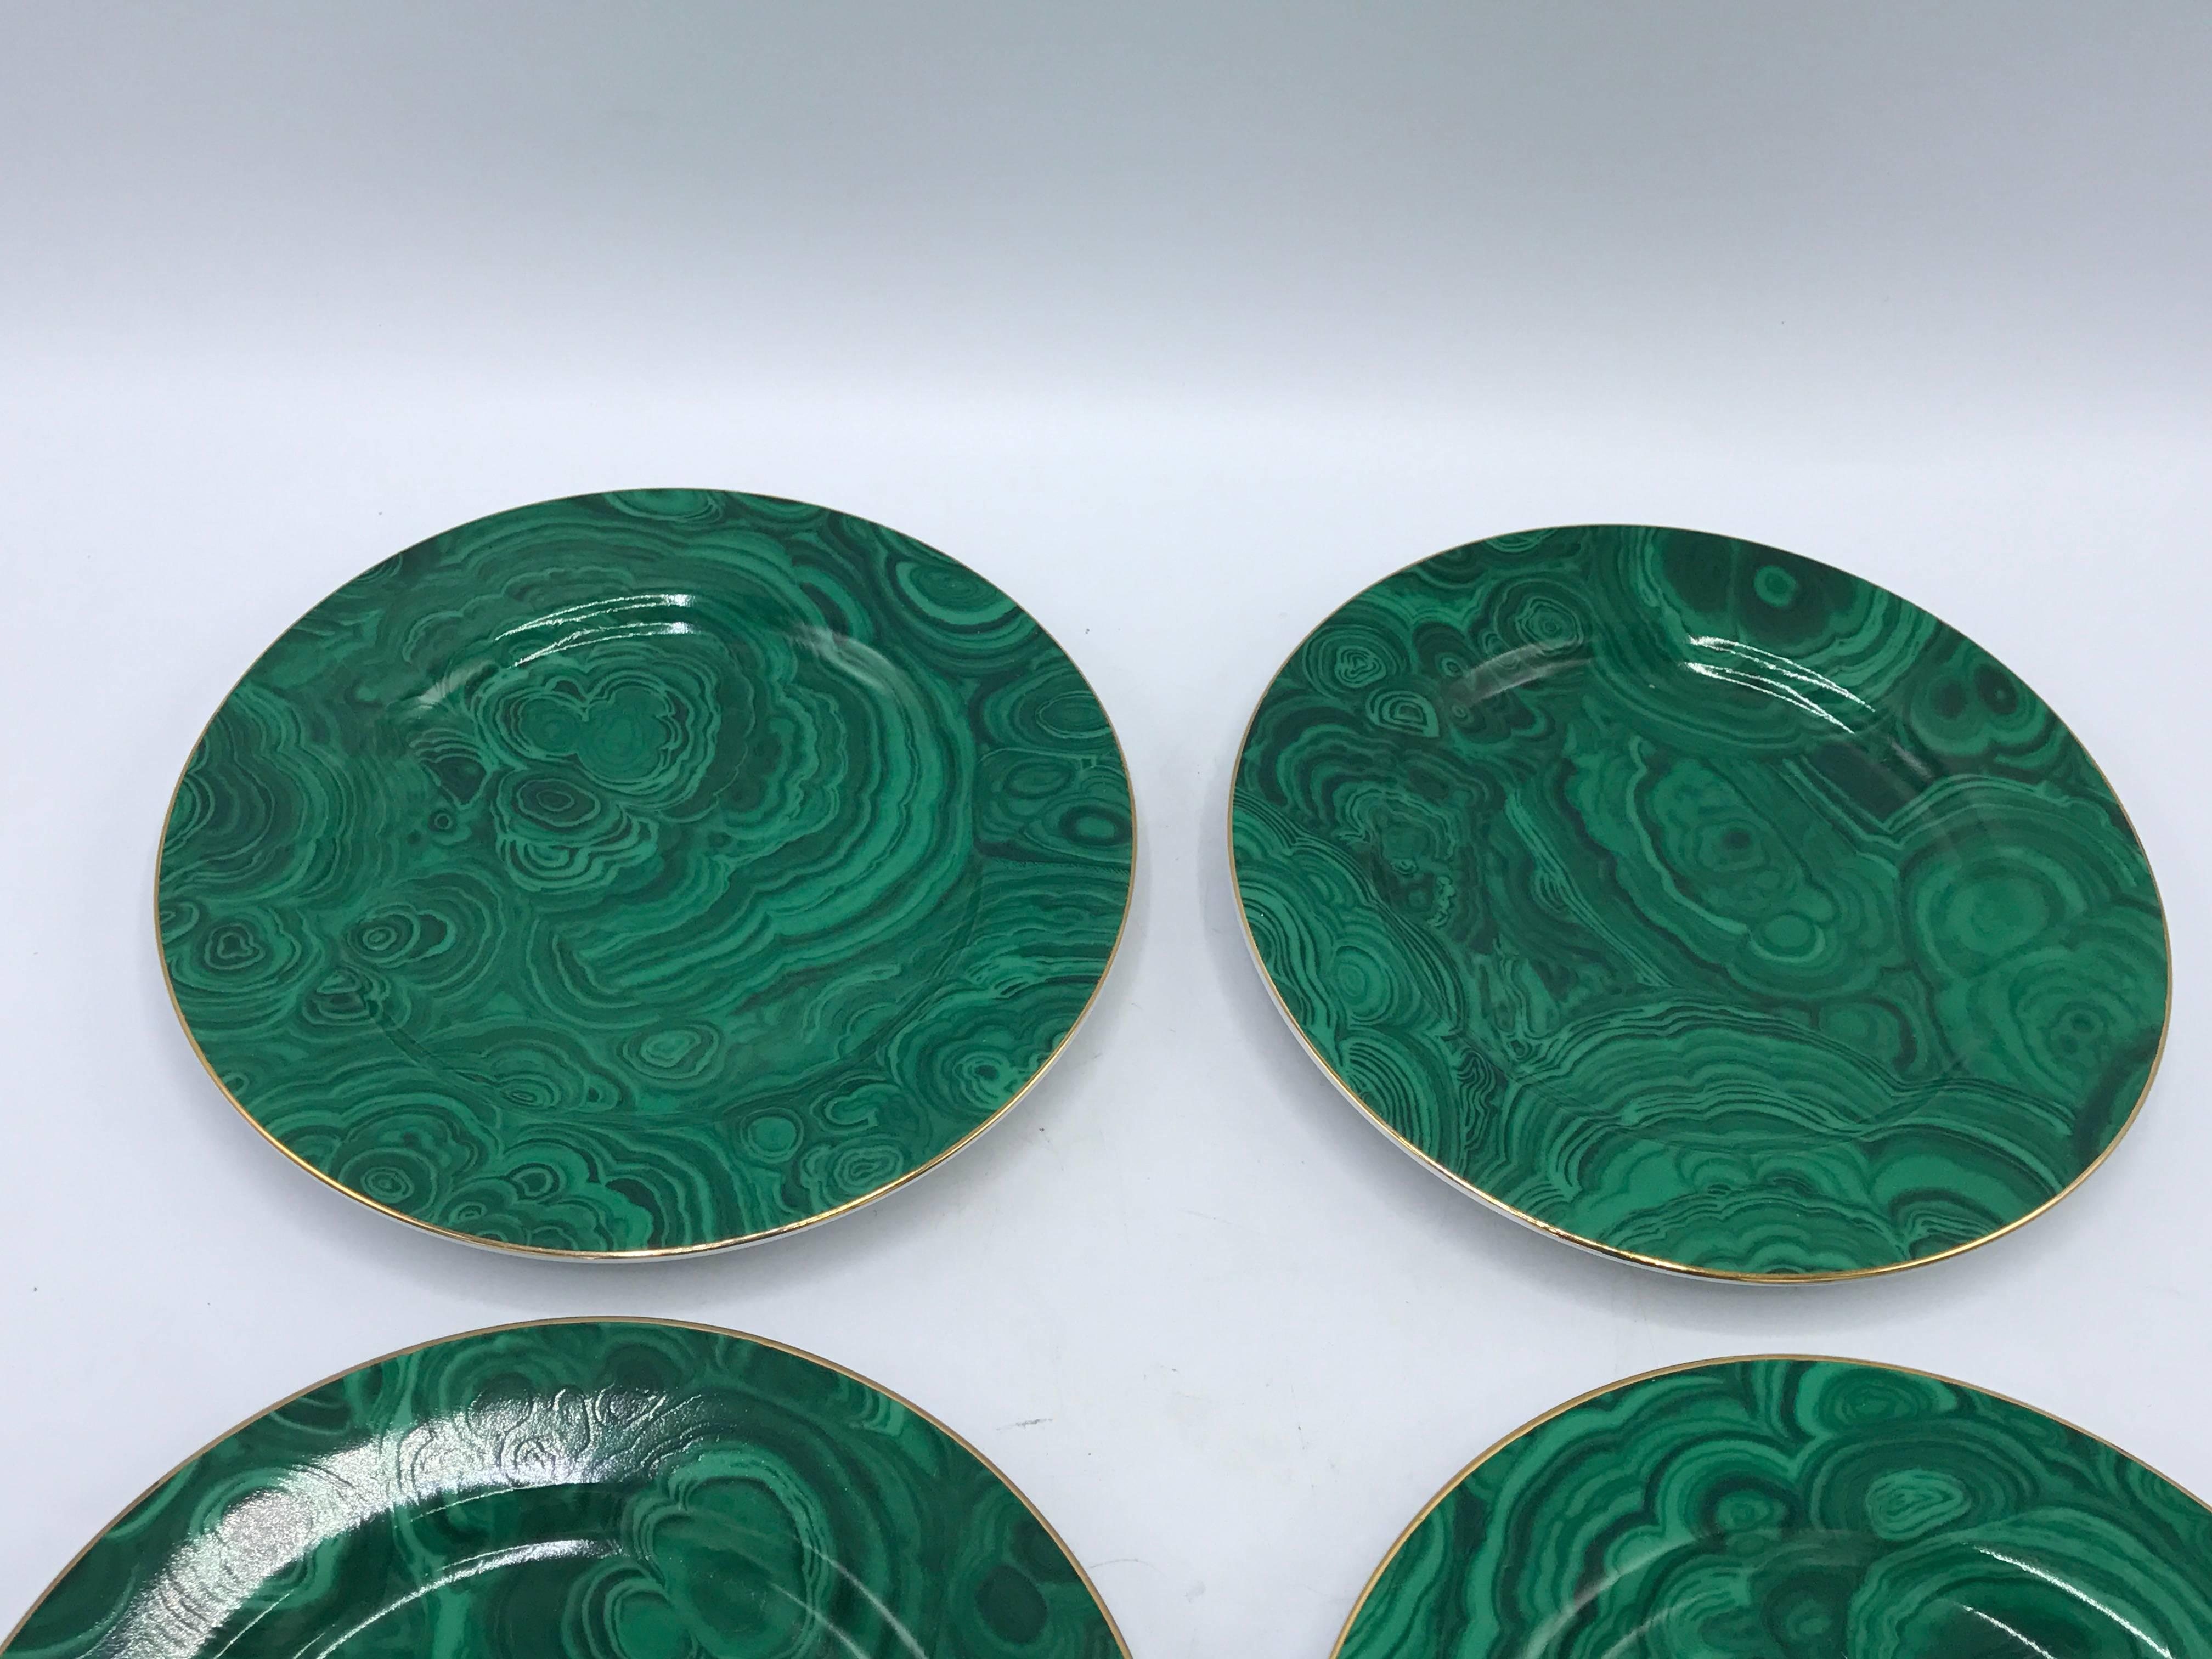 Offered is a stunning set of four, 1980s Neiman Marcus hand-painted malachite porcelain dessert plates with a gold 24-carat band around the perimeter. Marked on underside.